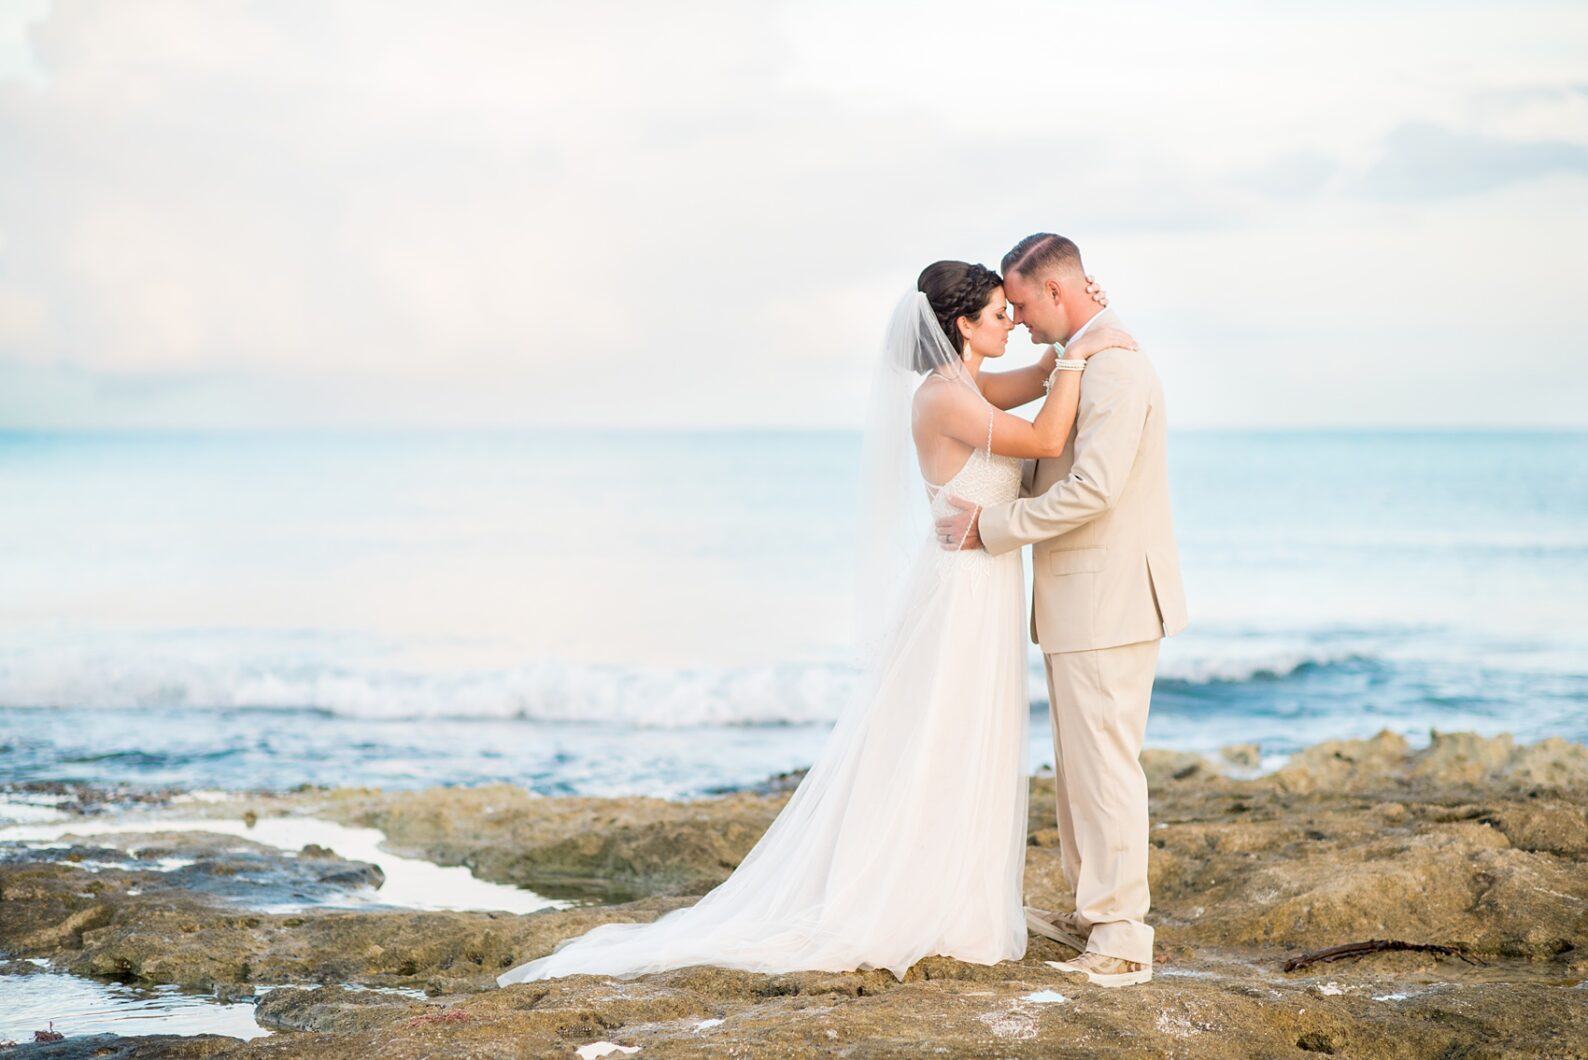 Mikkel Paige Photography photos from a wedding at Grand Paraiso, Mexico, Playa del Carmen Iberostar resort. Picture of the bride and groom on the ocean.